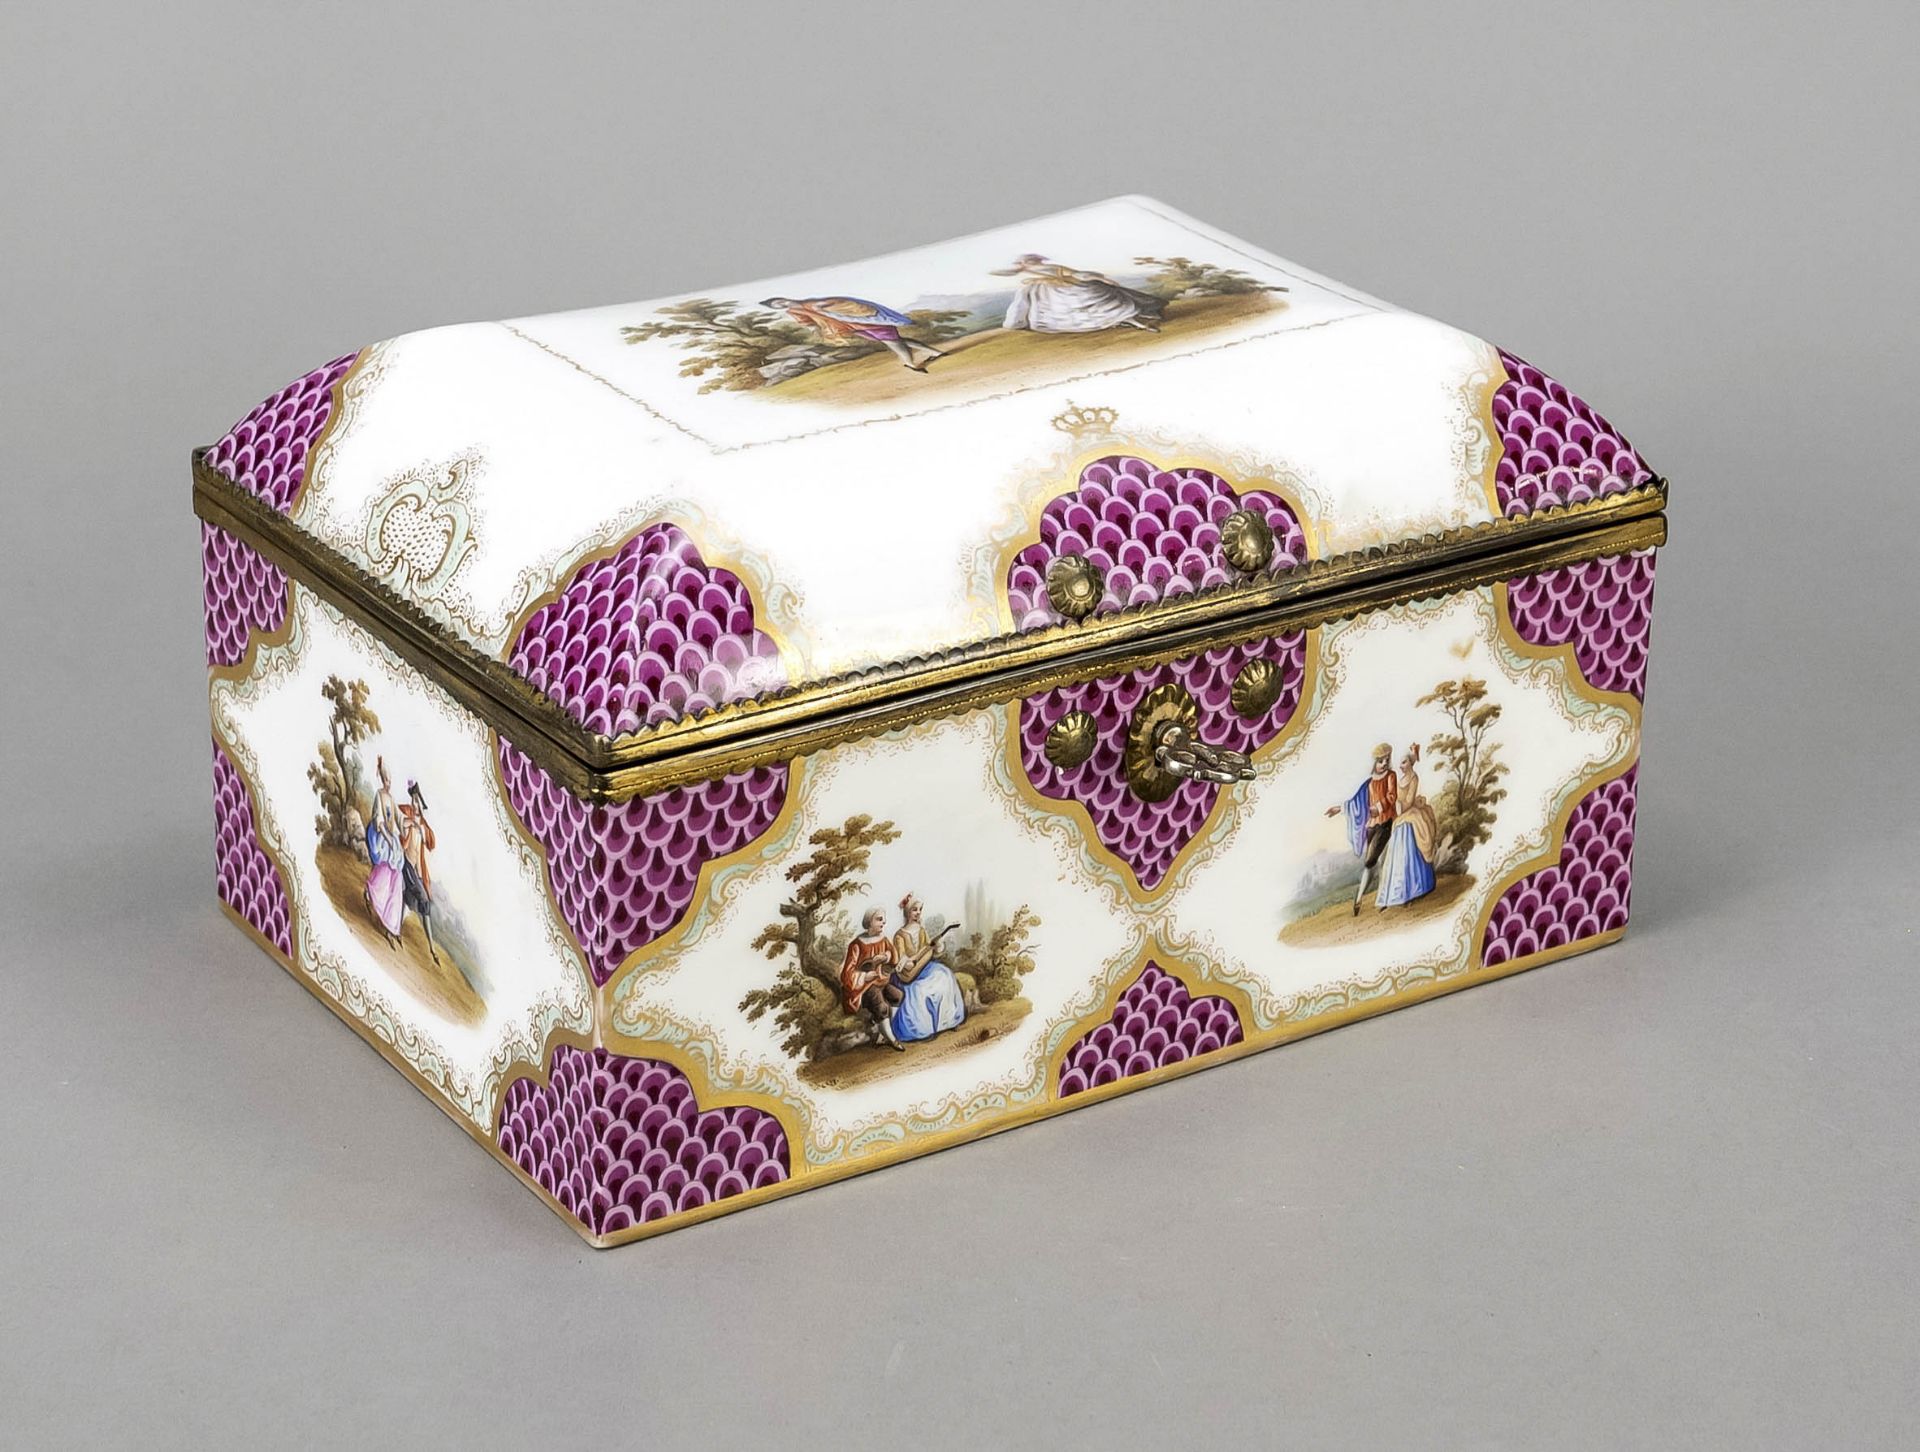 Lidded box in the style of Meissen, w. 18/19th c., fine polychrome painting with gallant couples